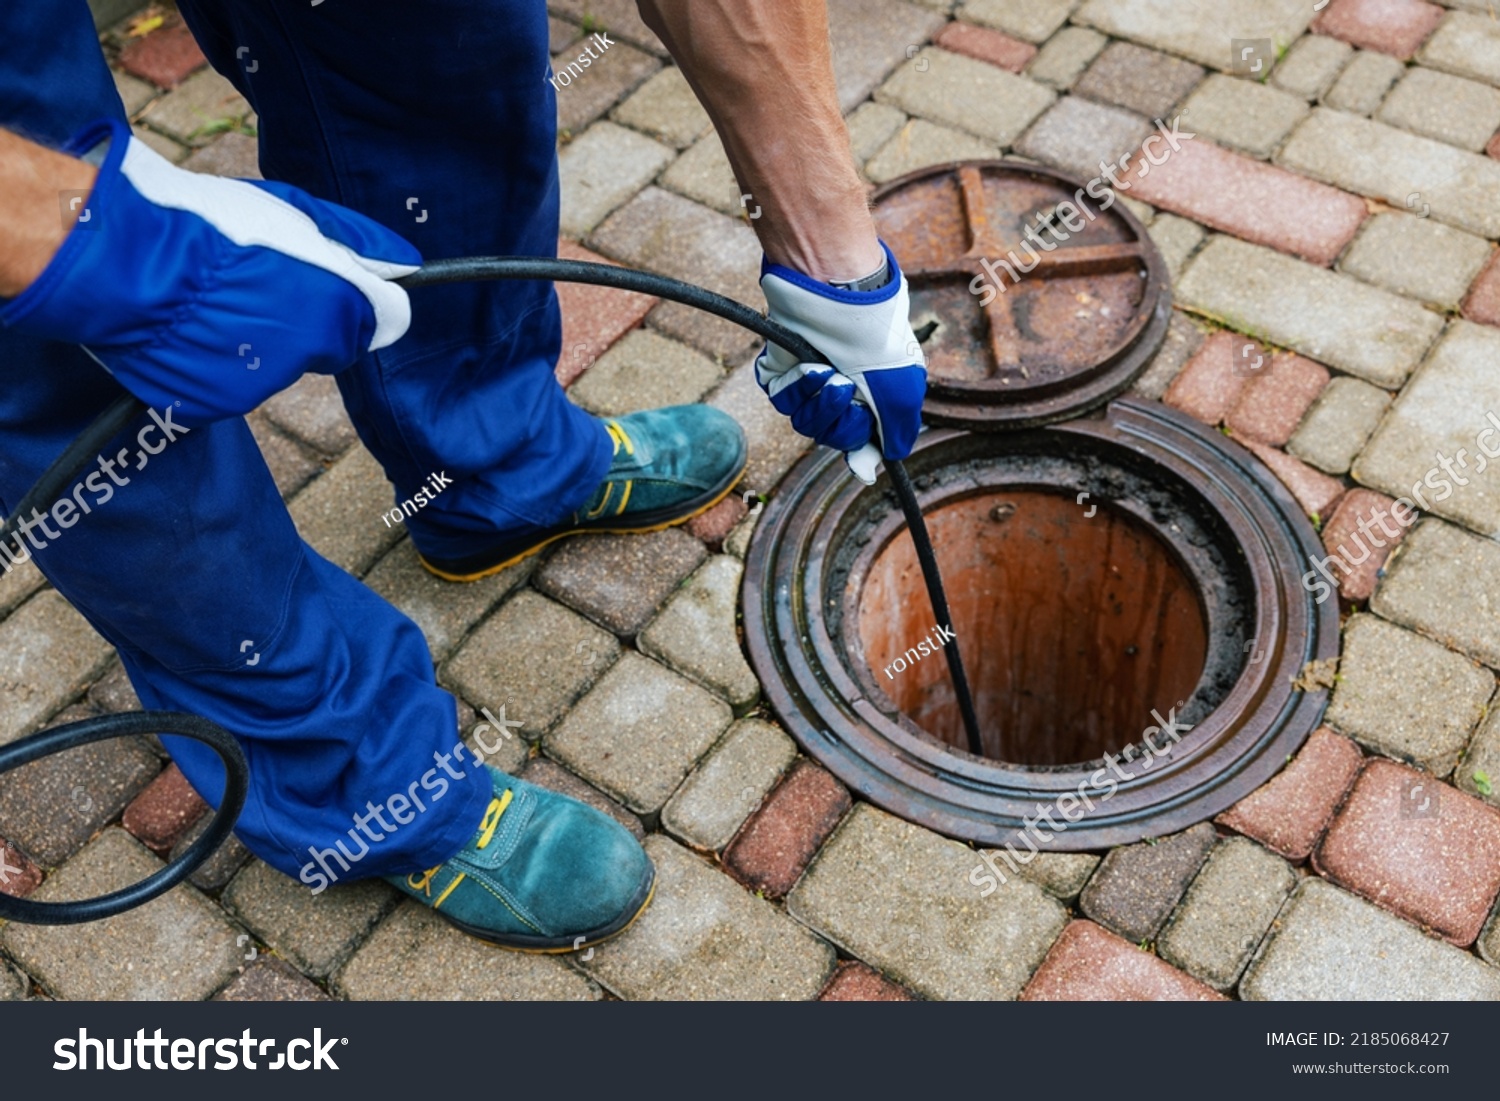 sewer cleaning service - worker clean a clogged drainage with hydro jetting #2185068427